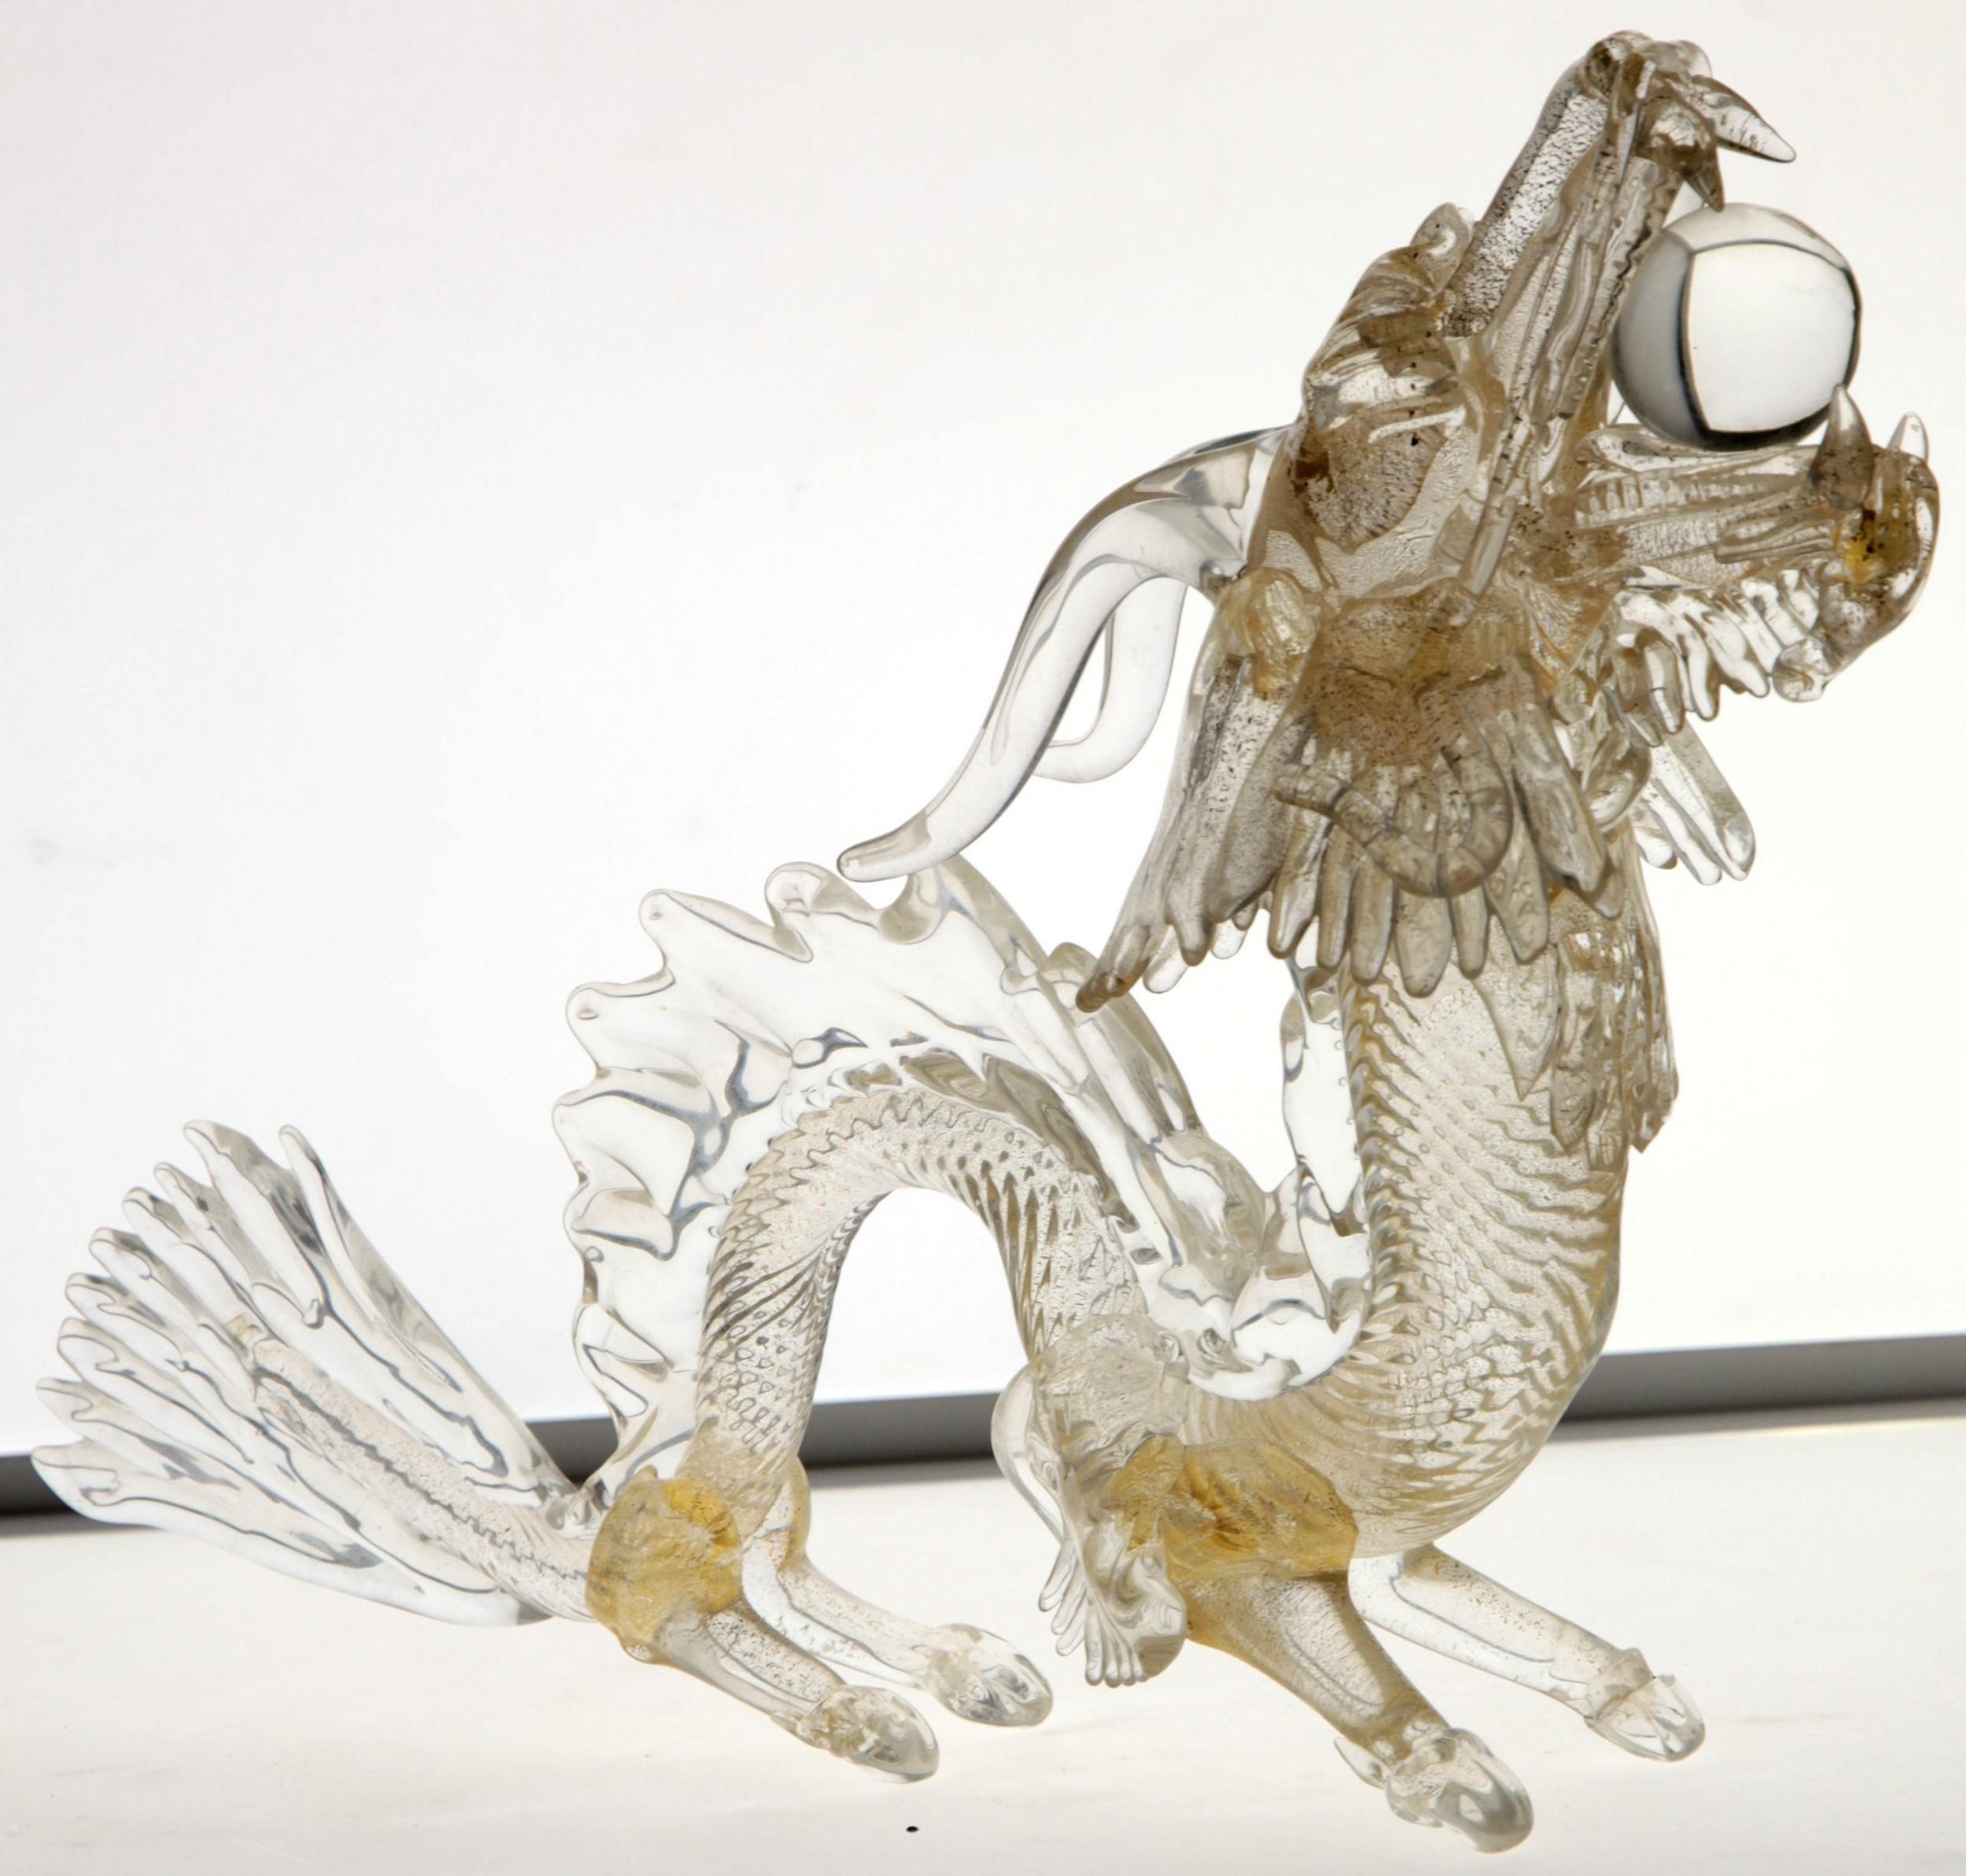 Glass dragon made with care of details and using clear glass with 24-carat gold leaf embedded int the glass.
Massiccio glass. 

Here it's represented in the typical position of the traditional Chinese dragon. 

Unknown autour, could be Licio